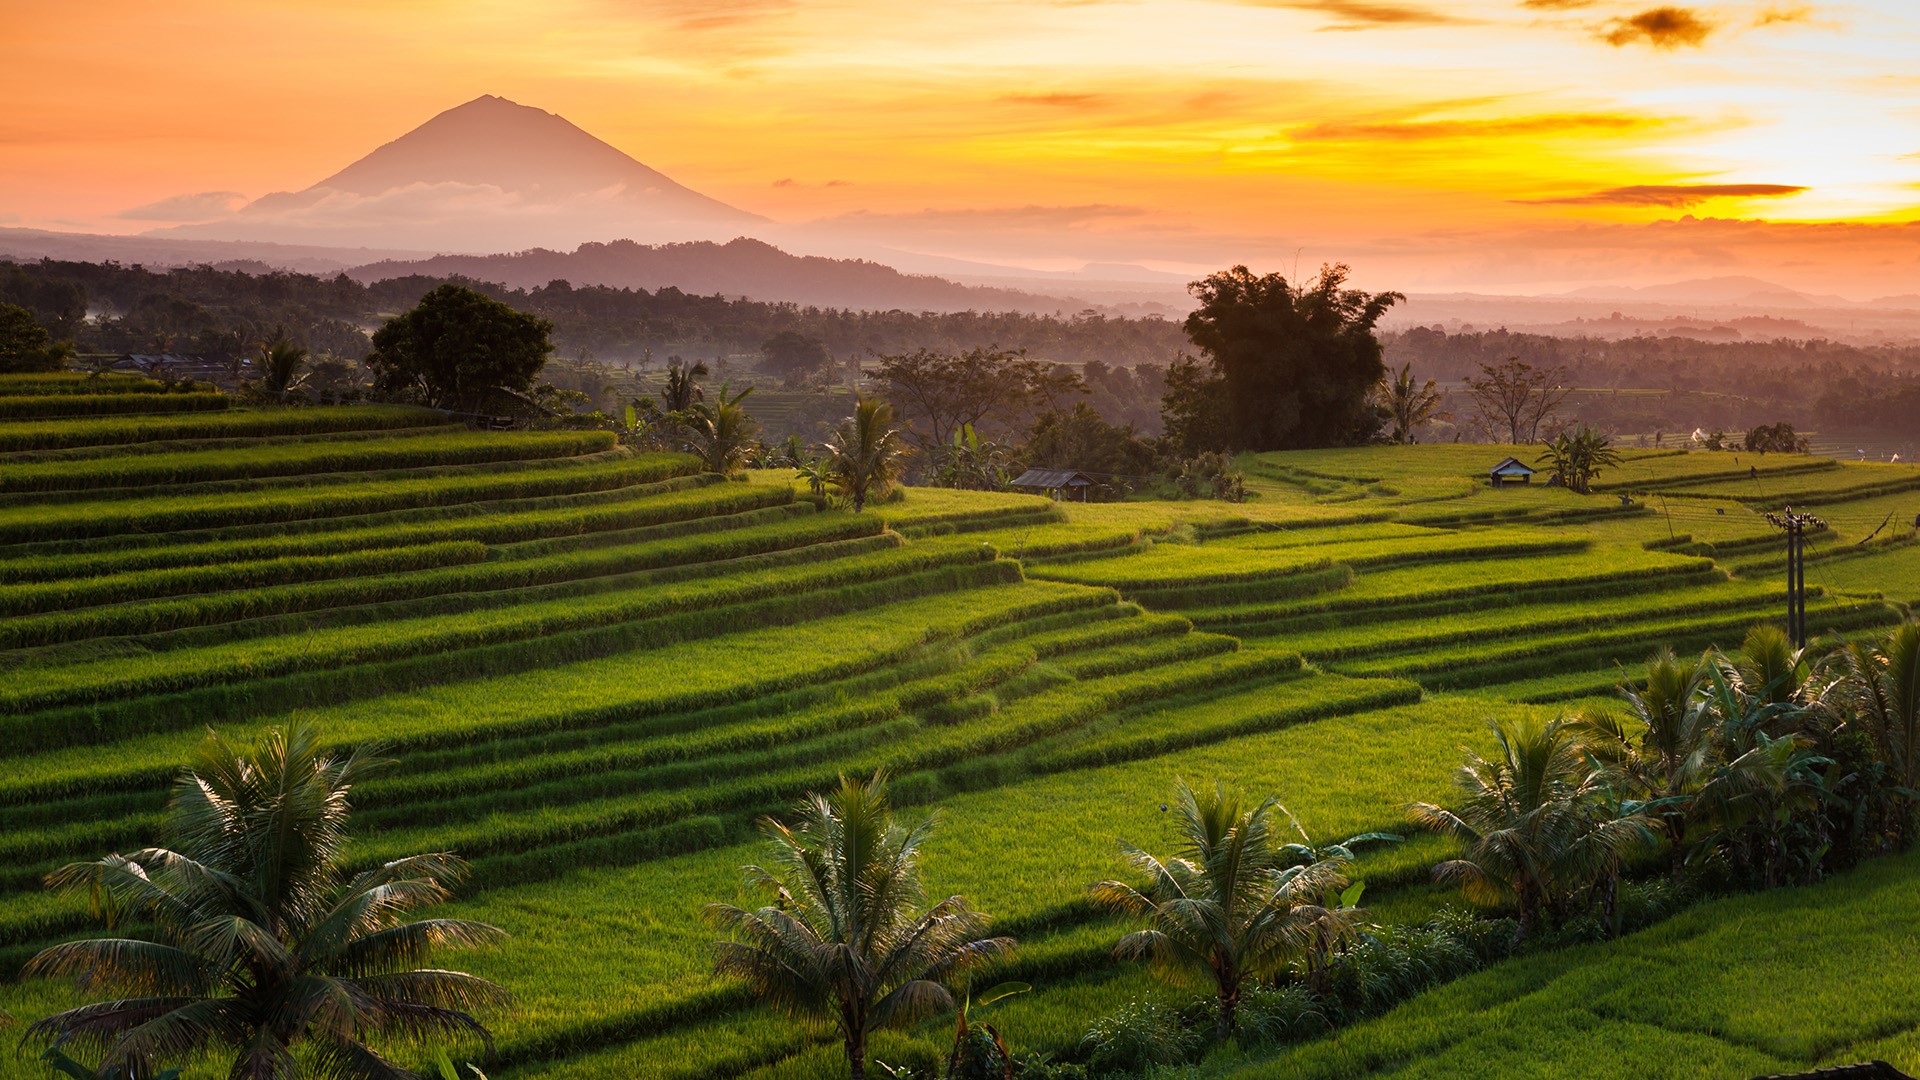 General 1920x1080 nature landscape mountains trees field sky sunset clouds far view rice terrace Bali Indonesia